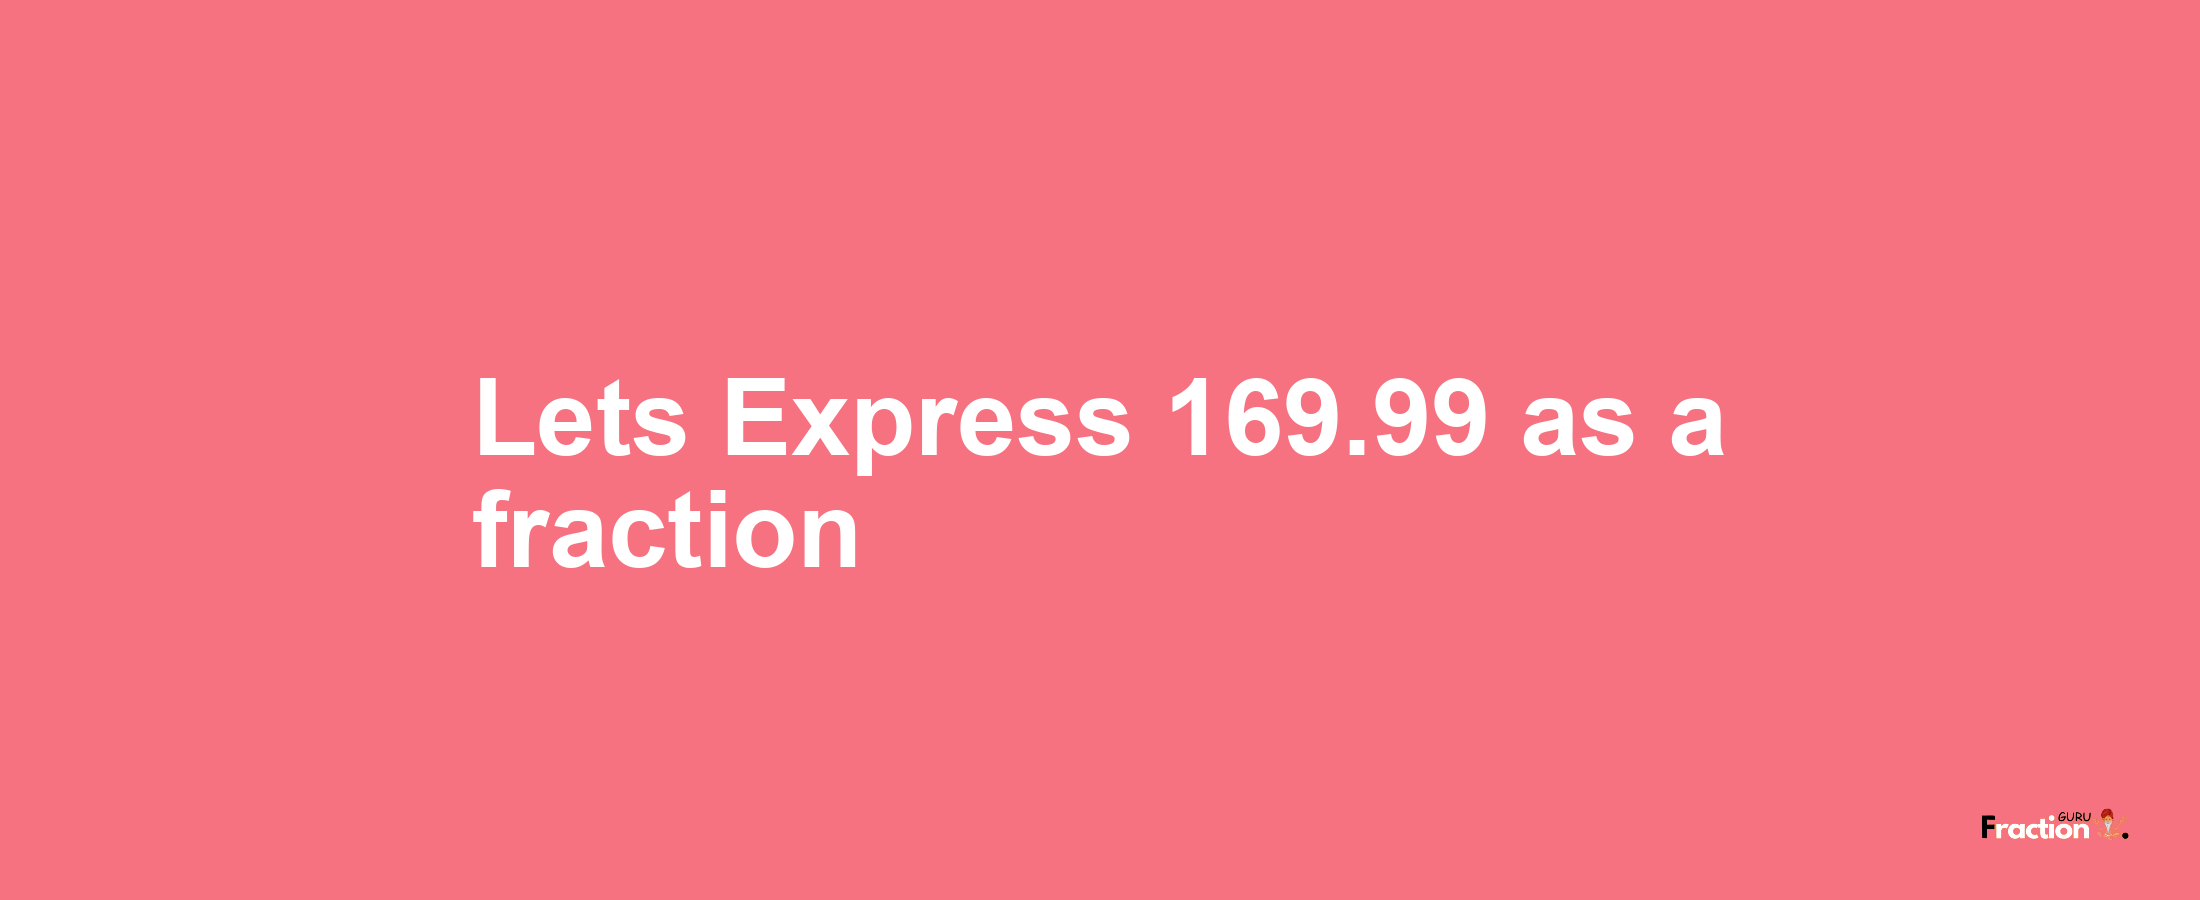 Lets Express 169.99 as afraction